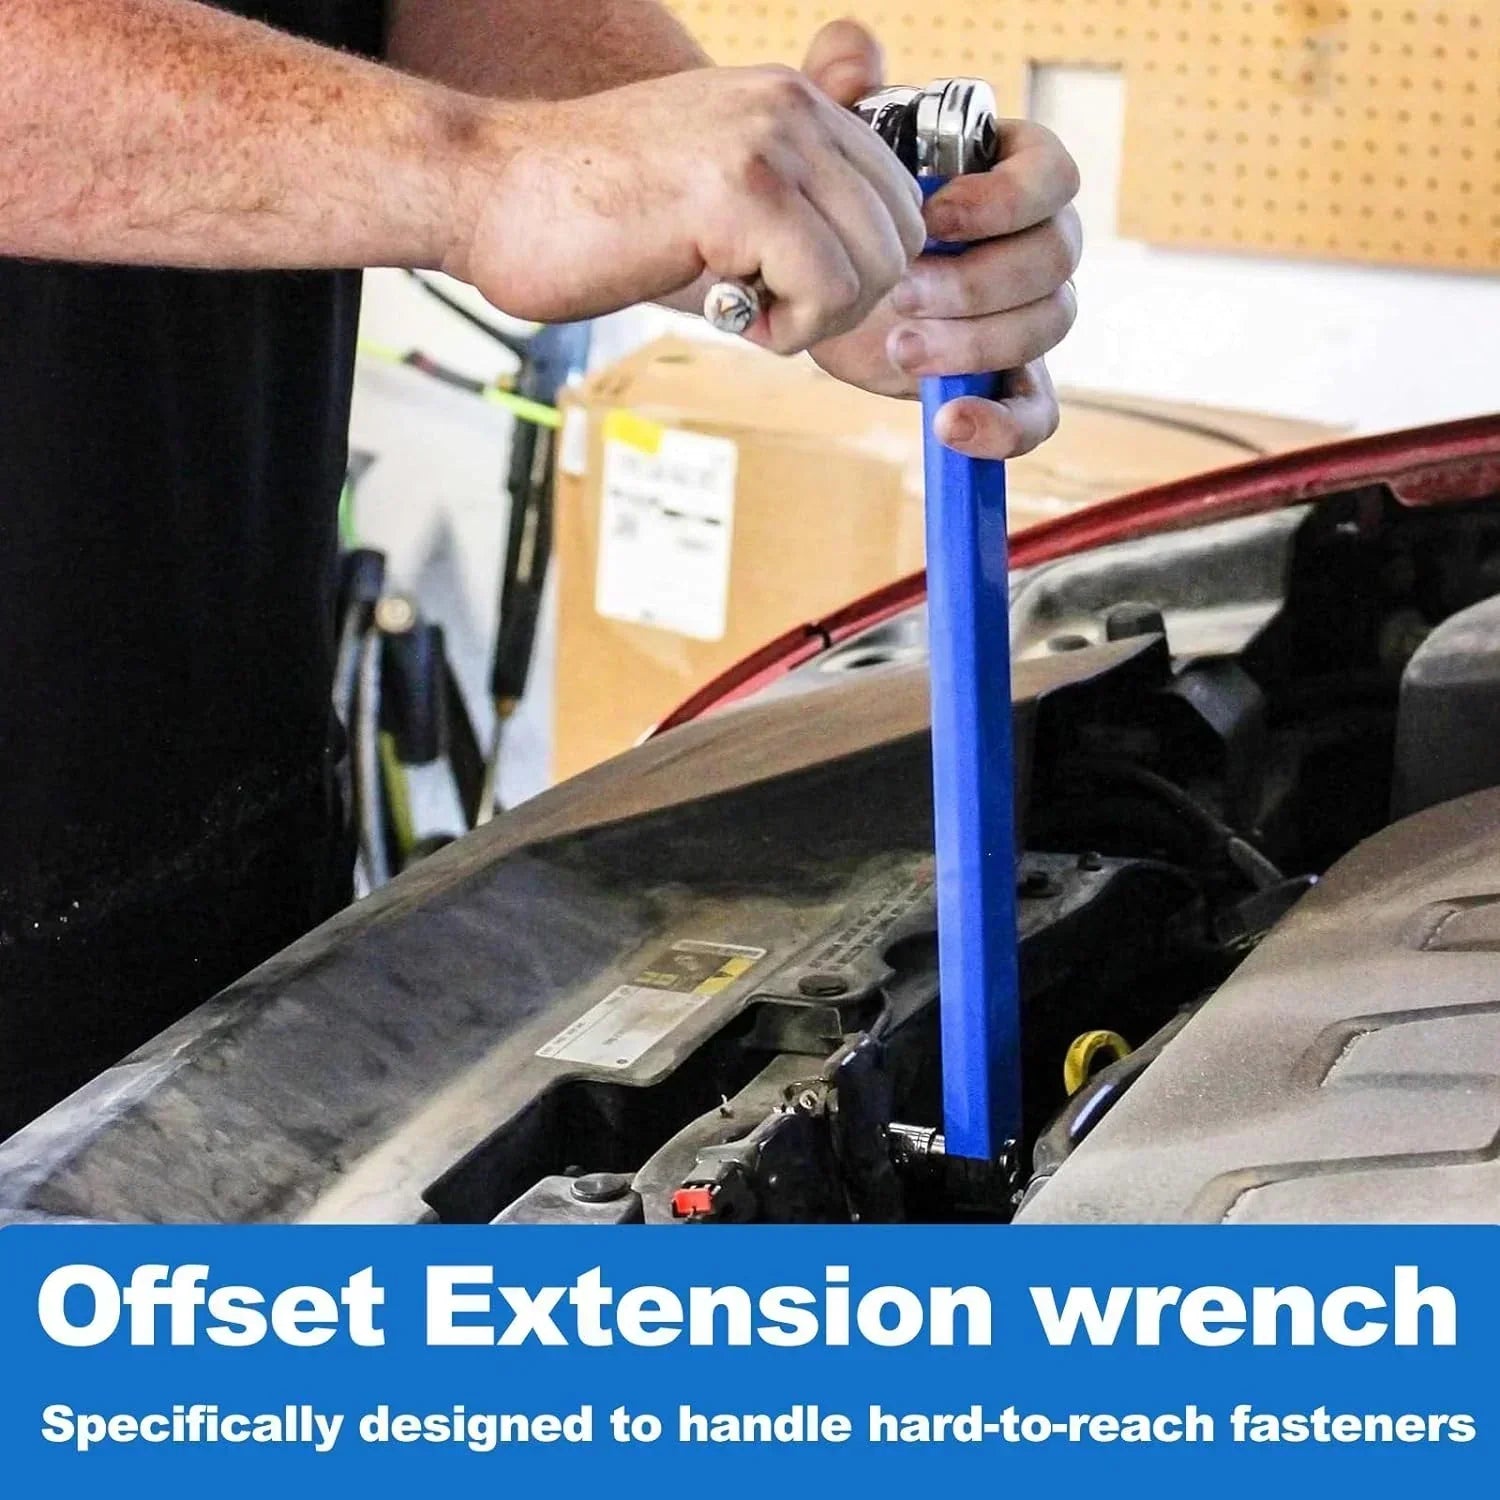 Offset Extension Wrench